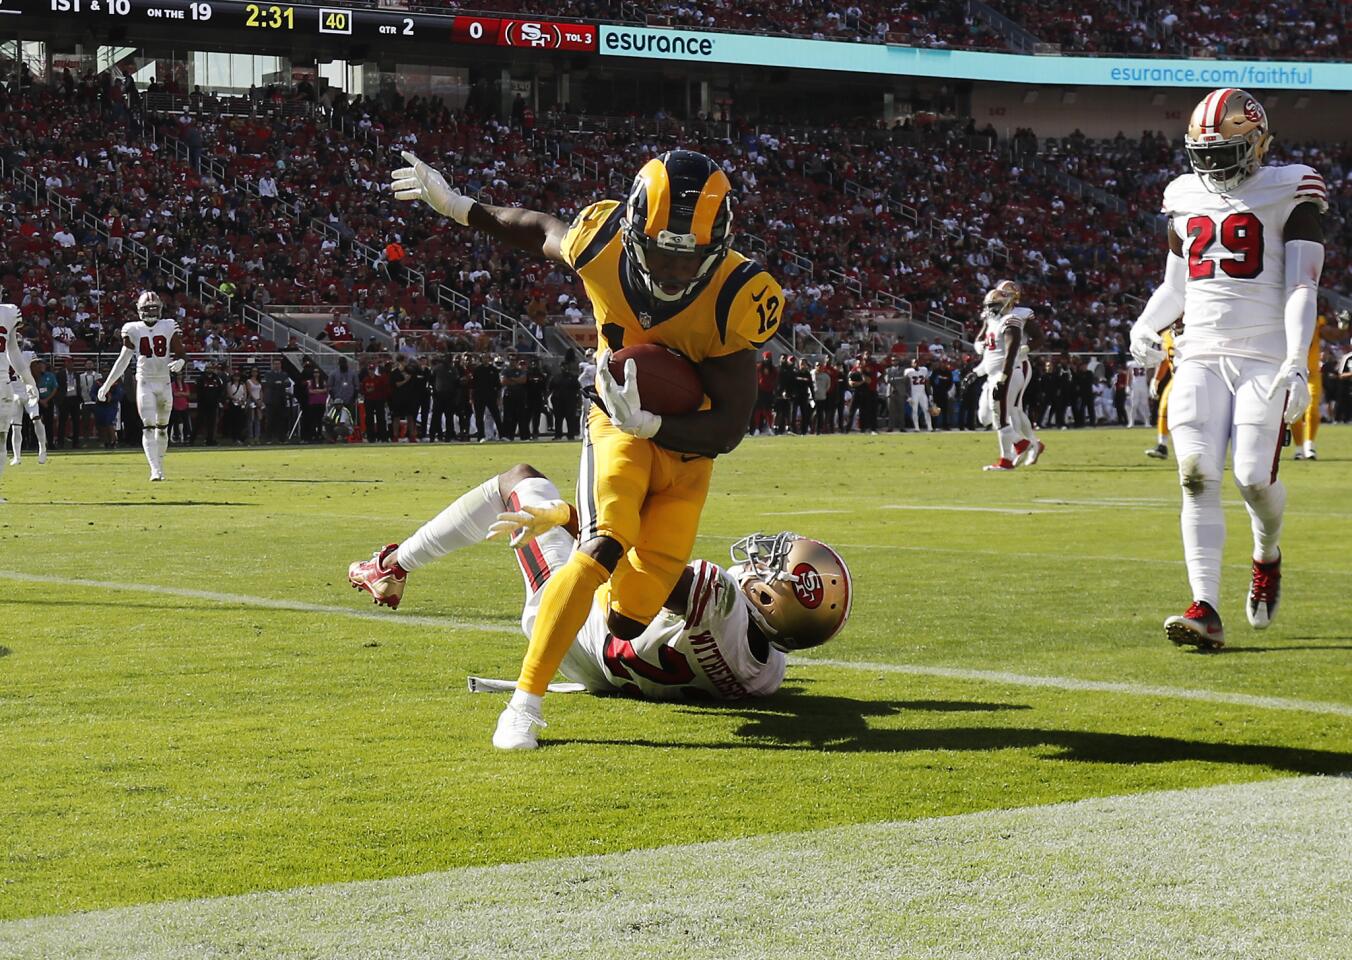 Rams wide receiver Brandin Cooks (12) catches a 19-yard touchdown pass against San Francisco 49ers cornerback Ahkello Witherspoon (23) in the first half at Levi's Stadium on Sunday in Santa Clara.